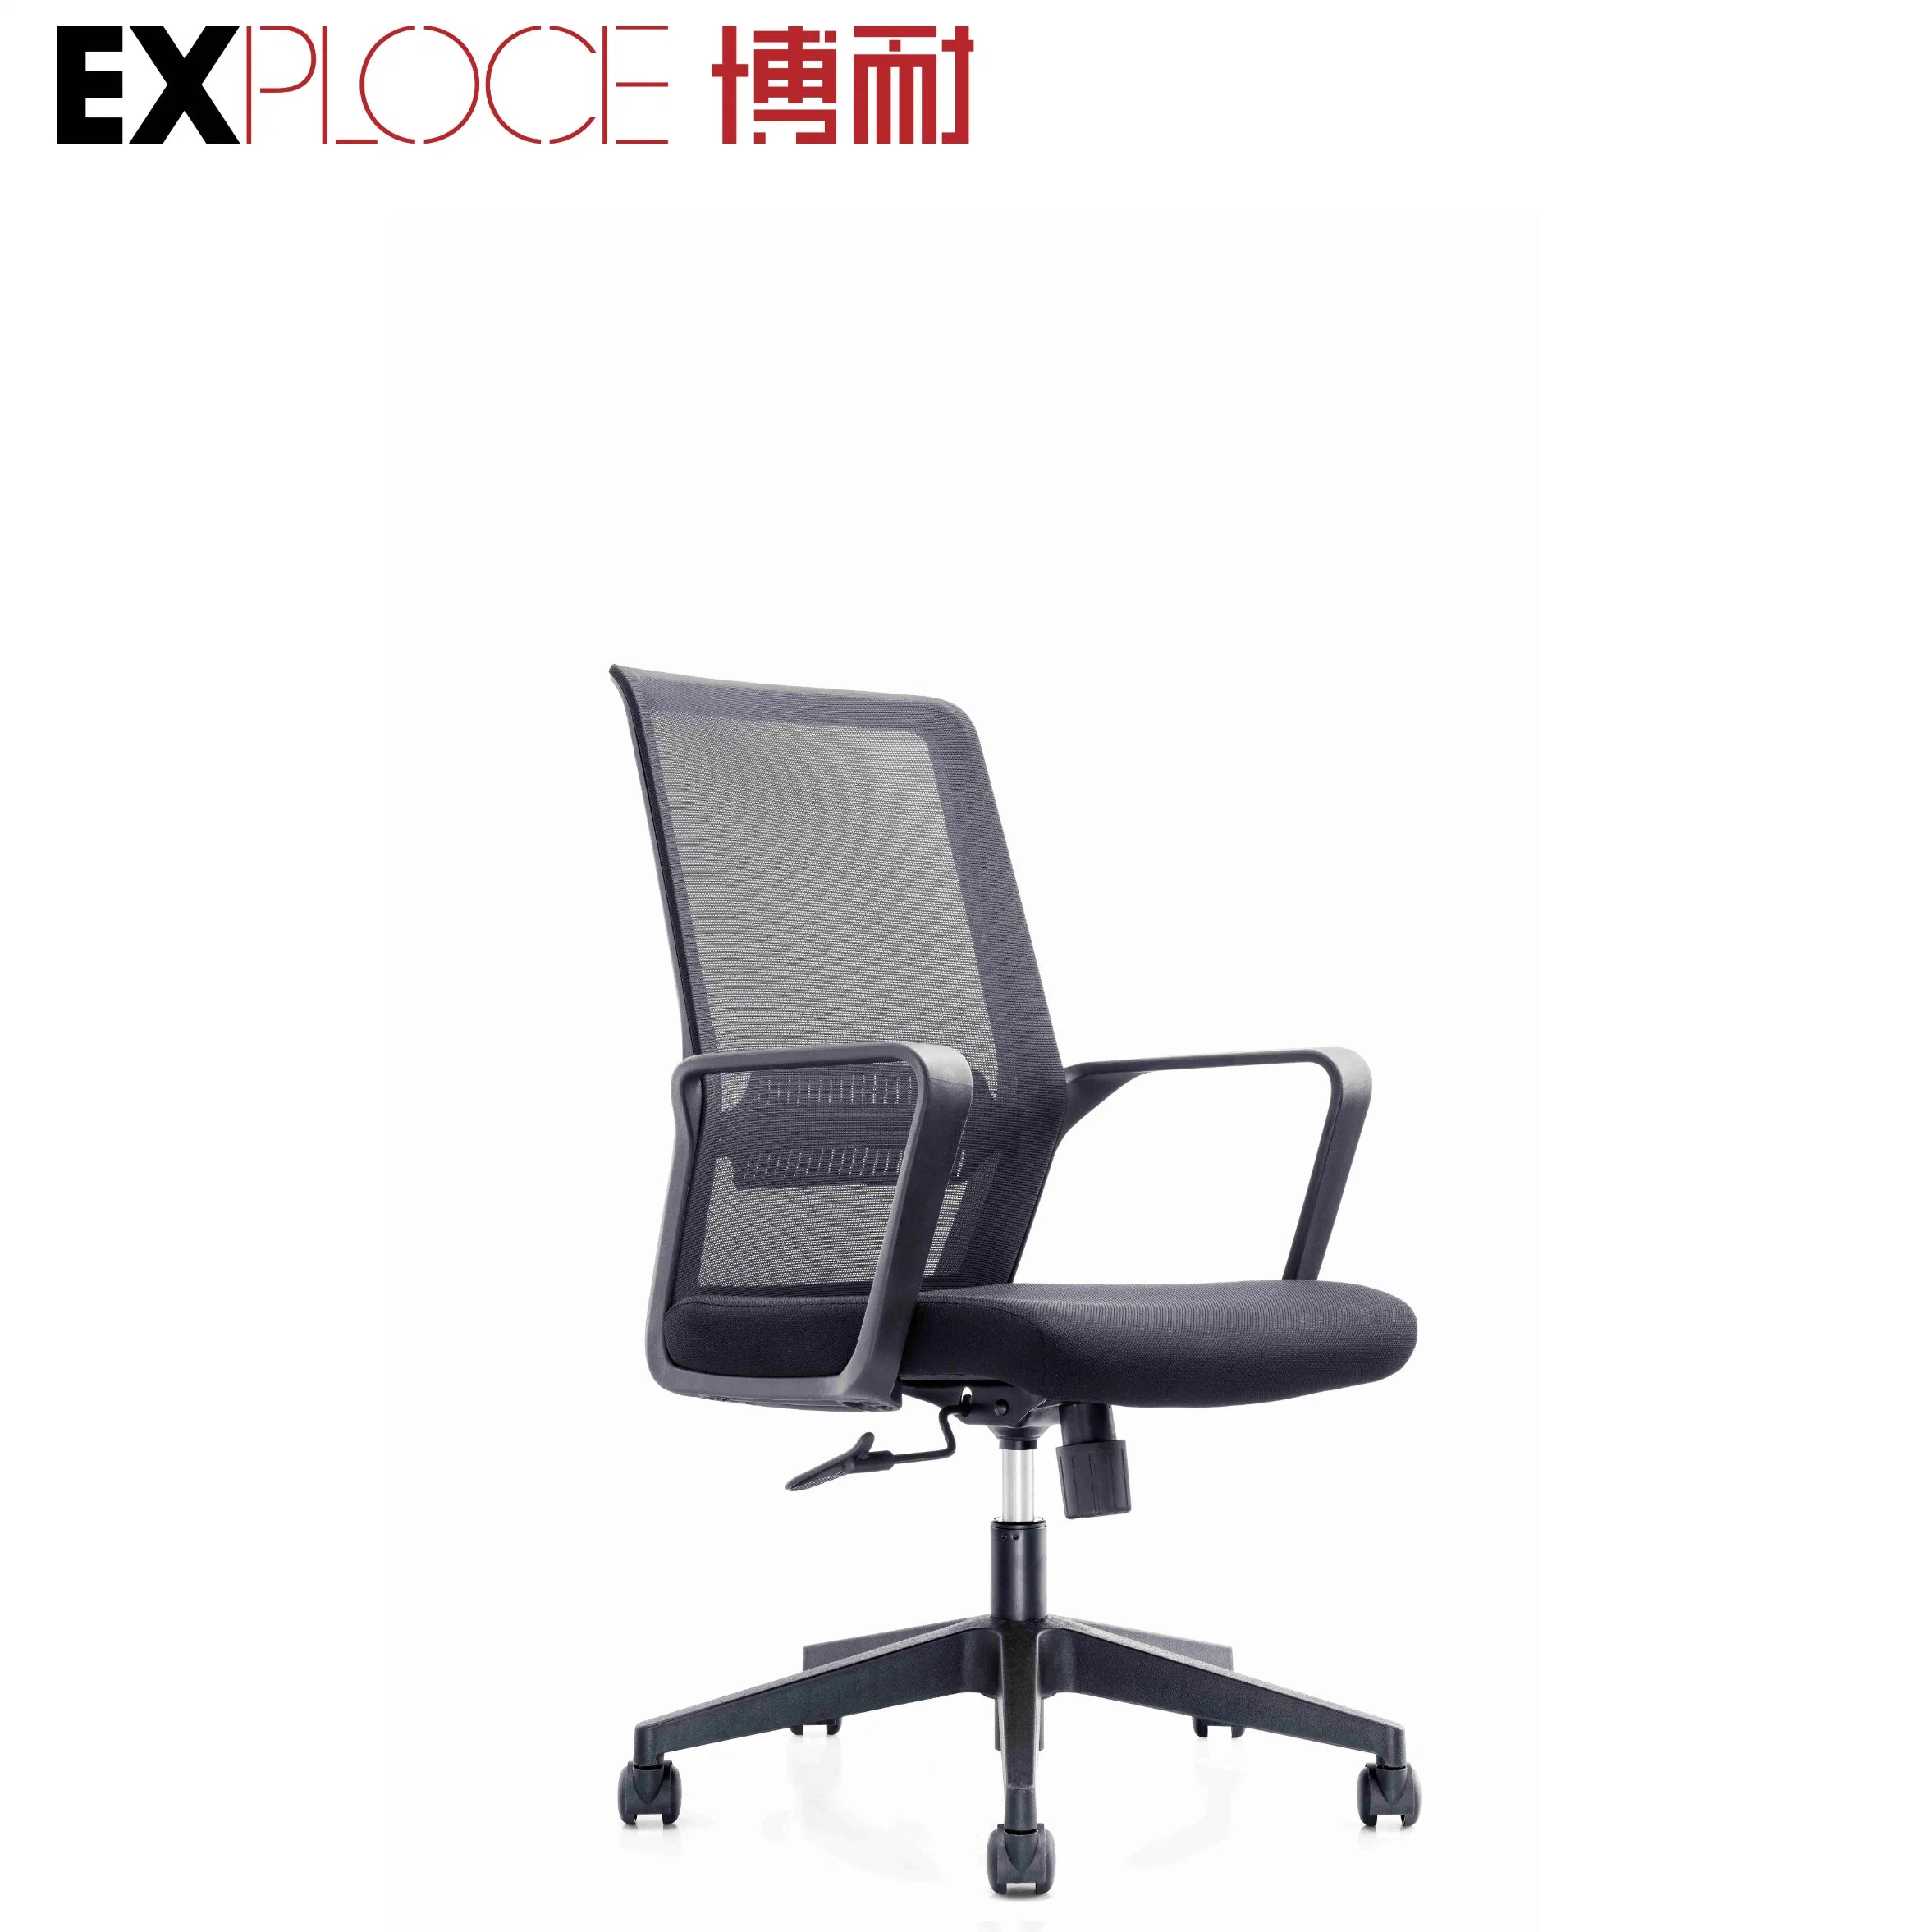 MID Back Rotating Wholesales Racing Plastic Executive Cheap Study Lumbar Mesh Support Chairs Furniture